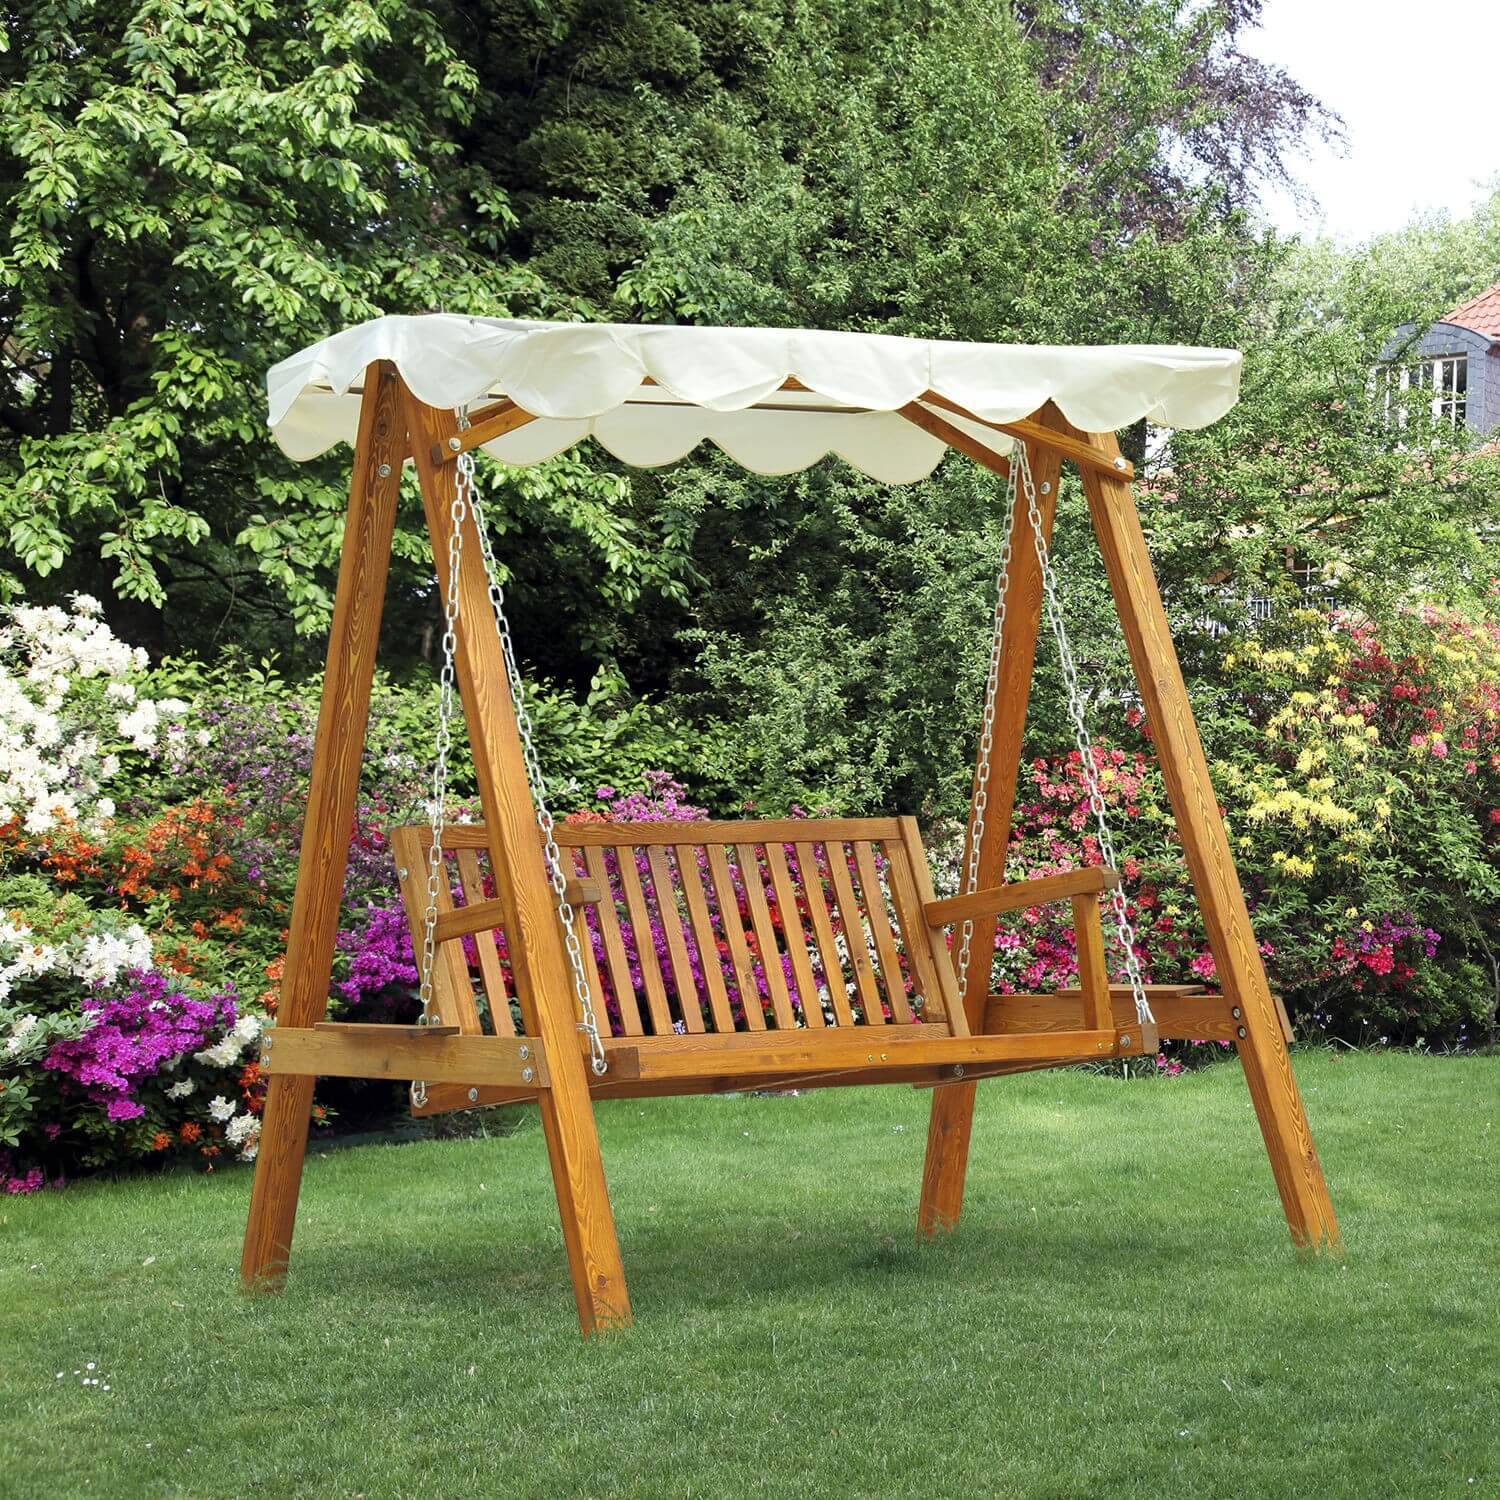 Awesome Diy Wooden Pallet Swing Chair Ideas Swing Chair Garden